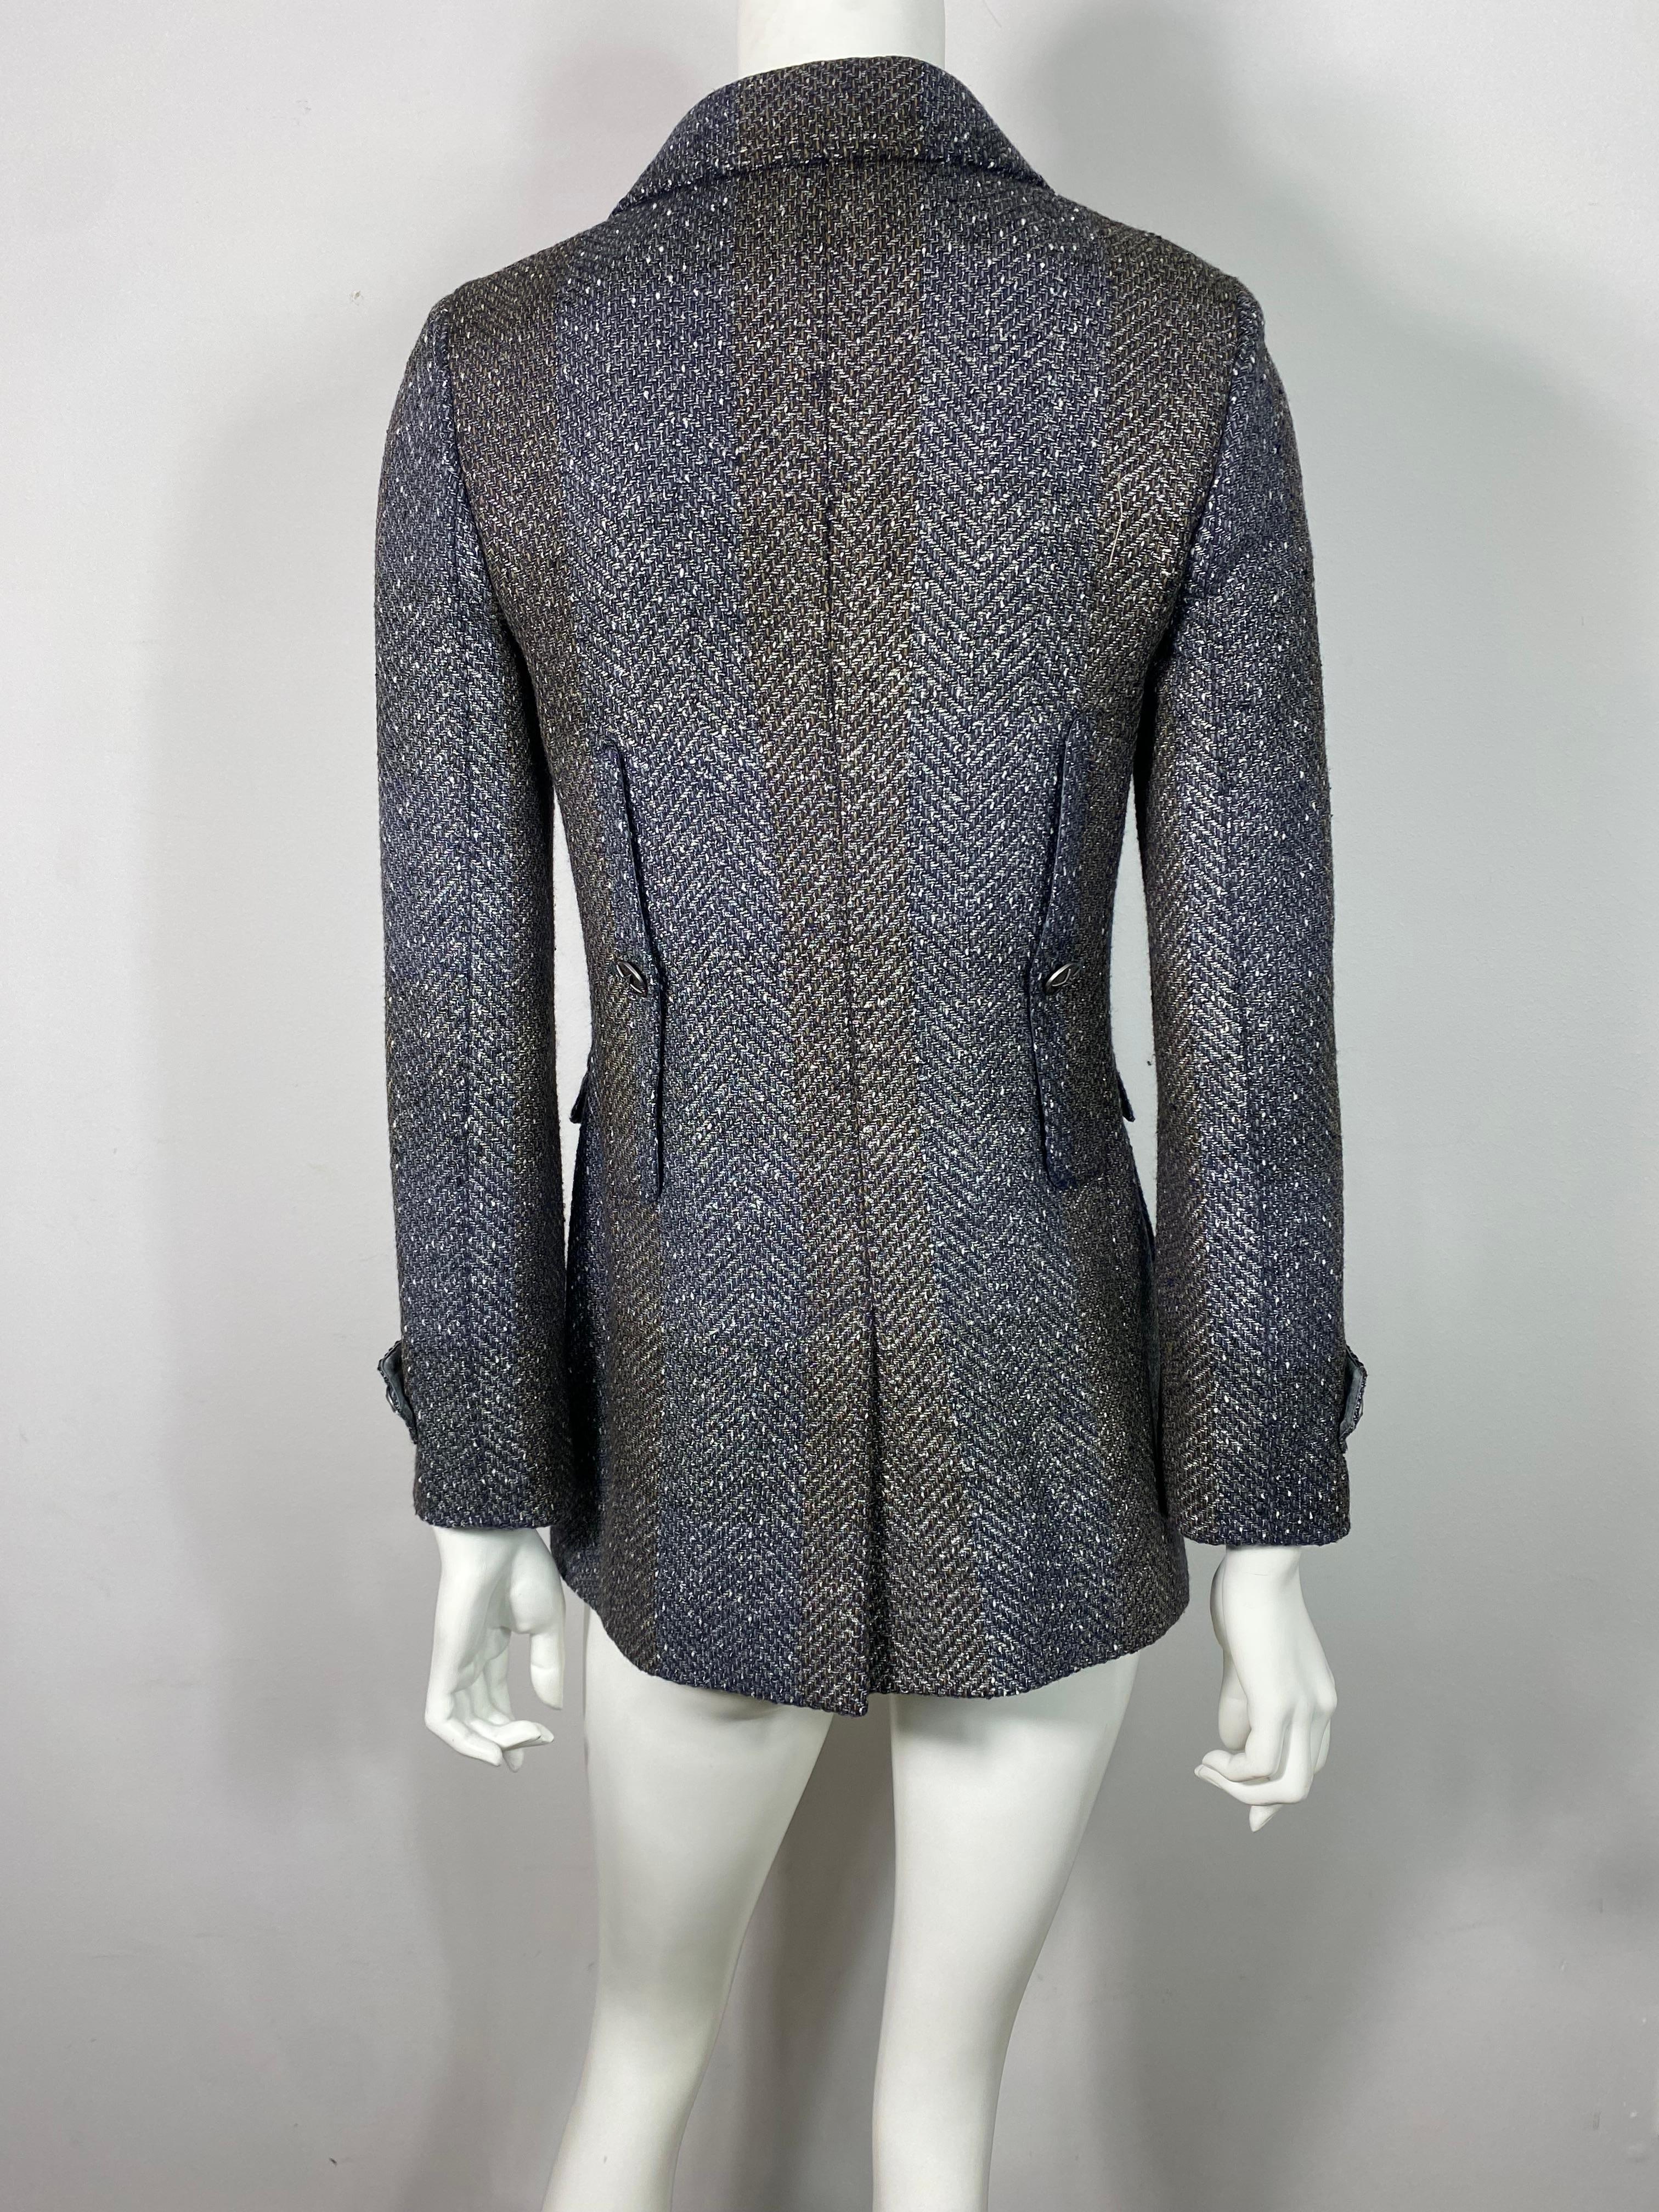 Chanel Fall 2007 Grey and Metallic Double Breasted Jacket - Size 34 For Sale 6